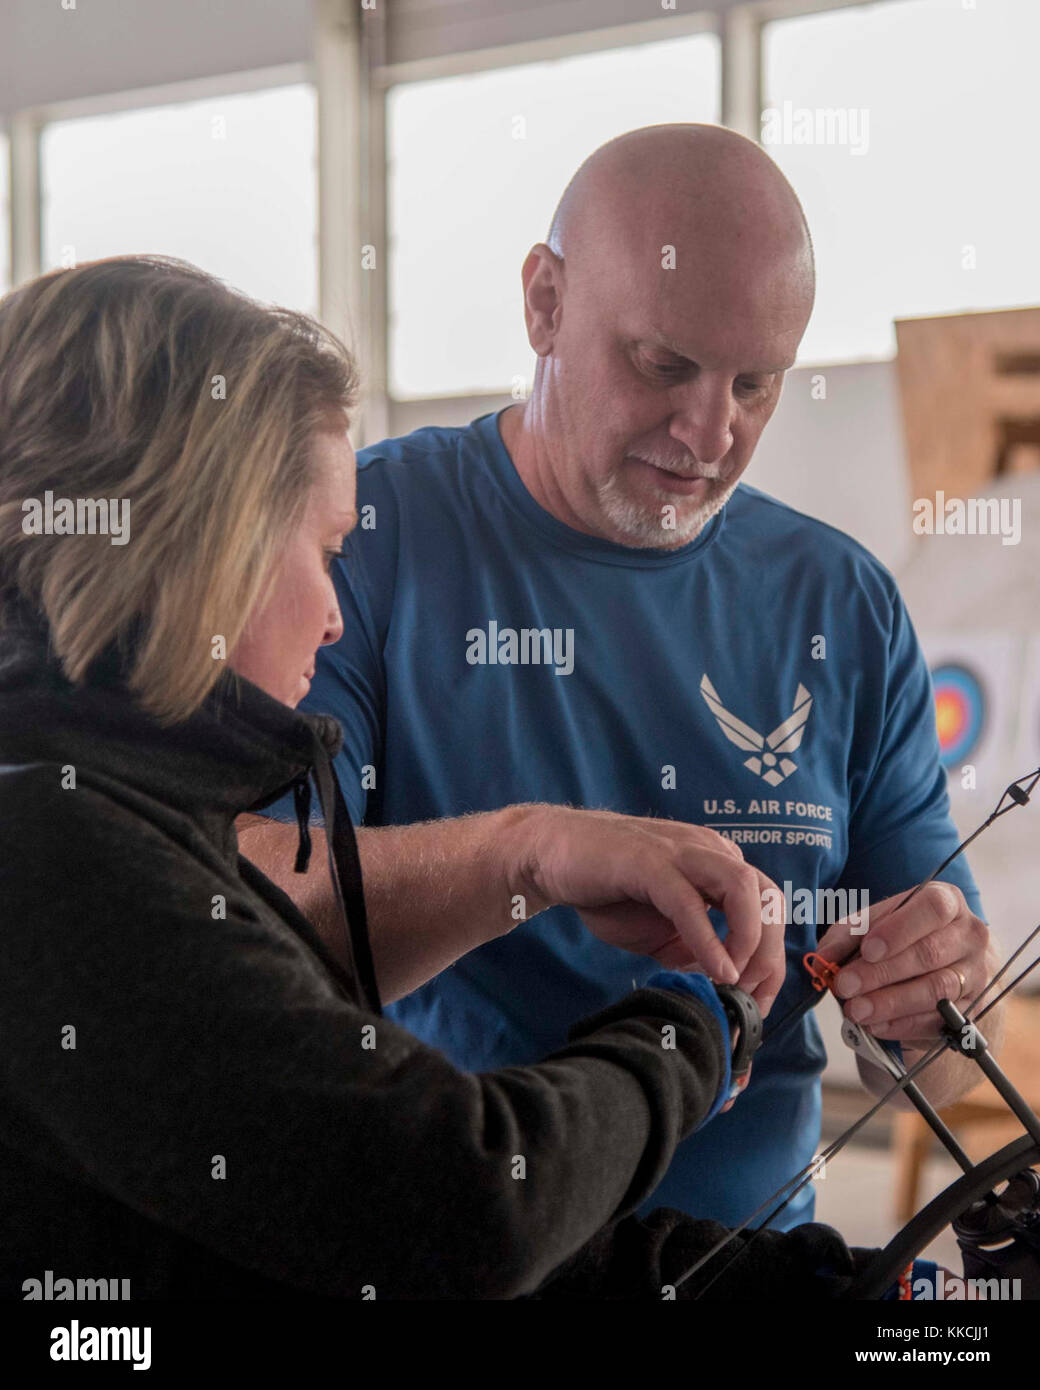 Jeff Matuszak, right, Warrior CARE coach, teaches, Amara Klika, Warrior CARE participant, how to position her hand on a compound bow during an archery training session at Joint Base Andrews, Md., Nov 13, 2017. This was one of many events hosted during the week-long Air Force Wounded Warrior CARE Event, which taught injured Airmen about the many programs available to help them rehabilitate. (U.S. Air Force photo by Airman 1st Class Valentina Lopez) Stock Photo